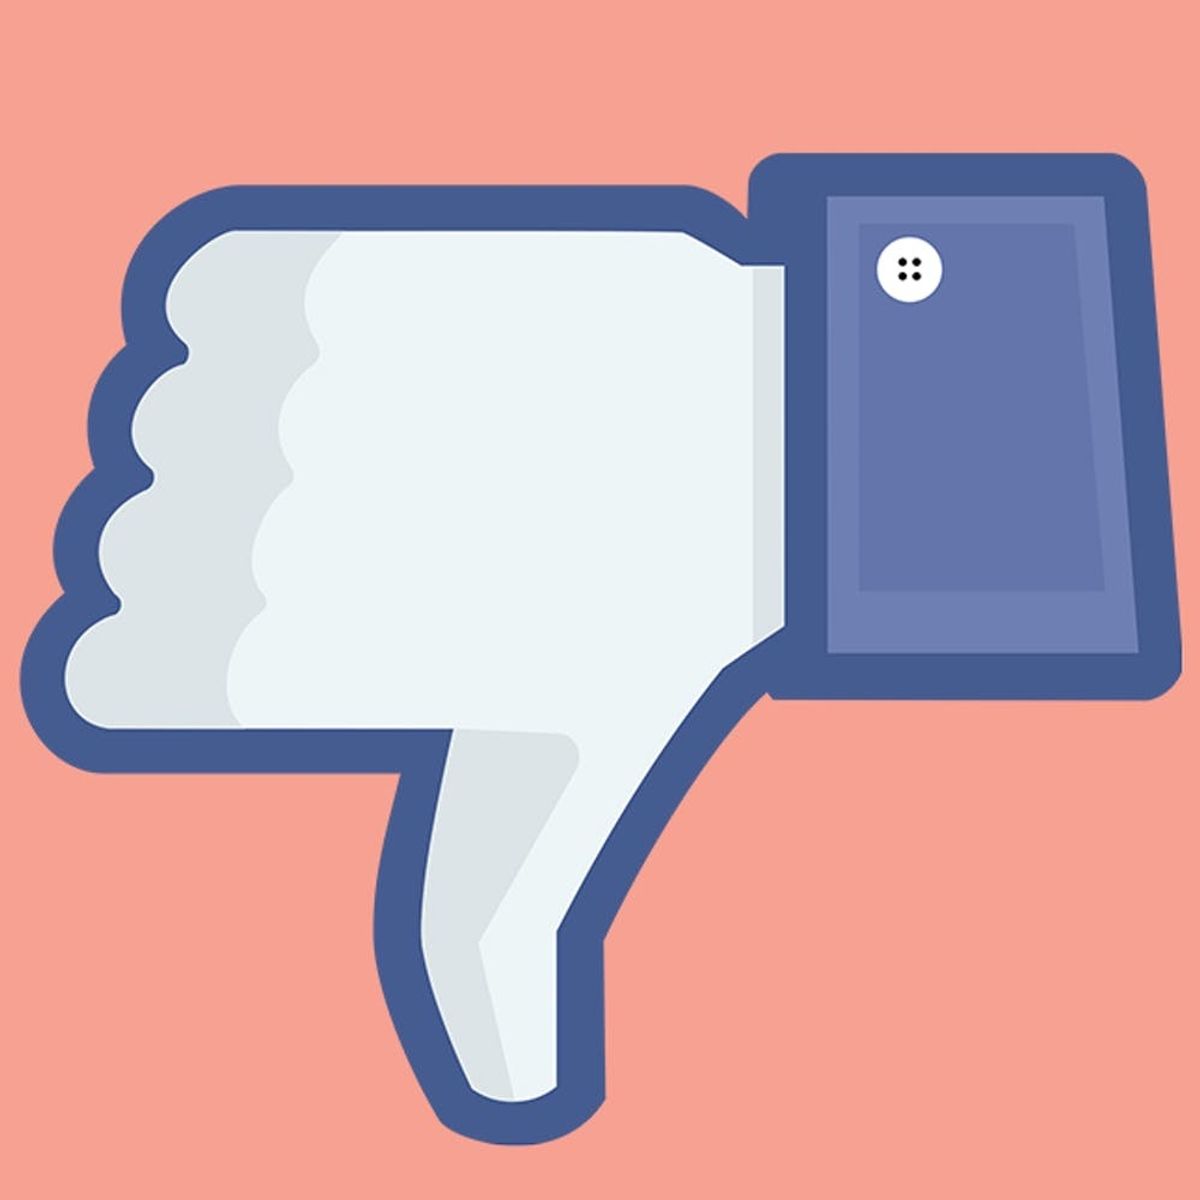 BREAKING: Facebook *Finally* Made a Decision on a Dislike Button